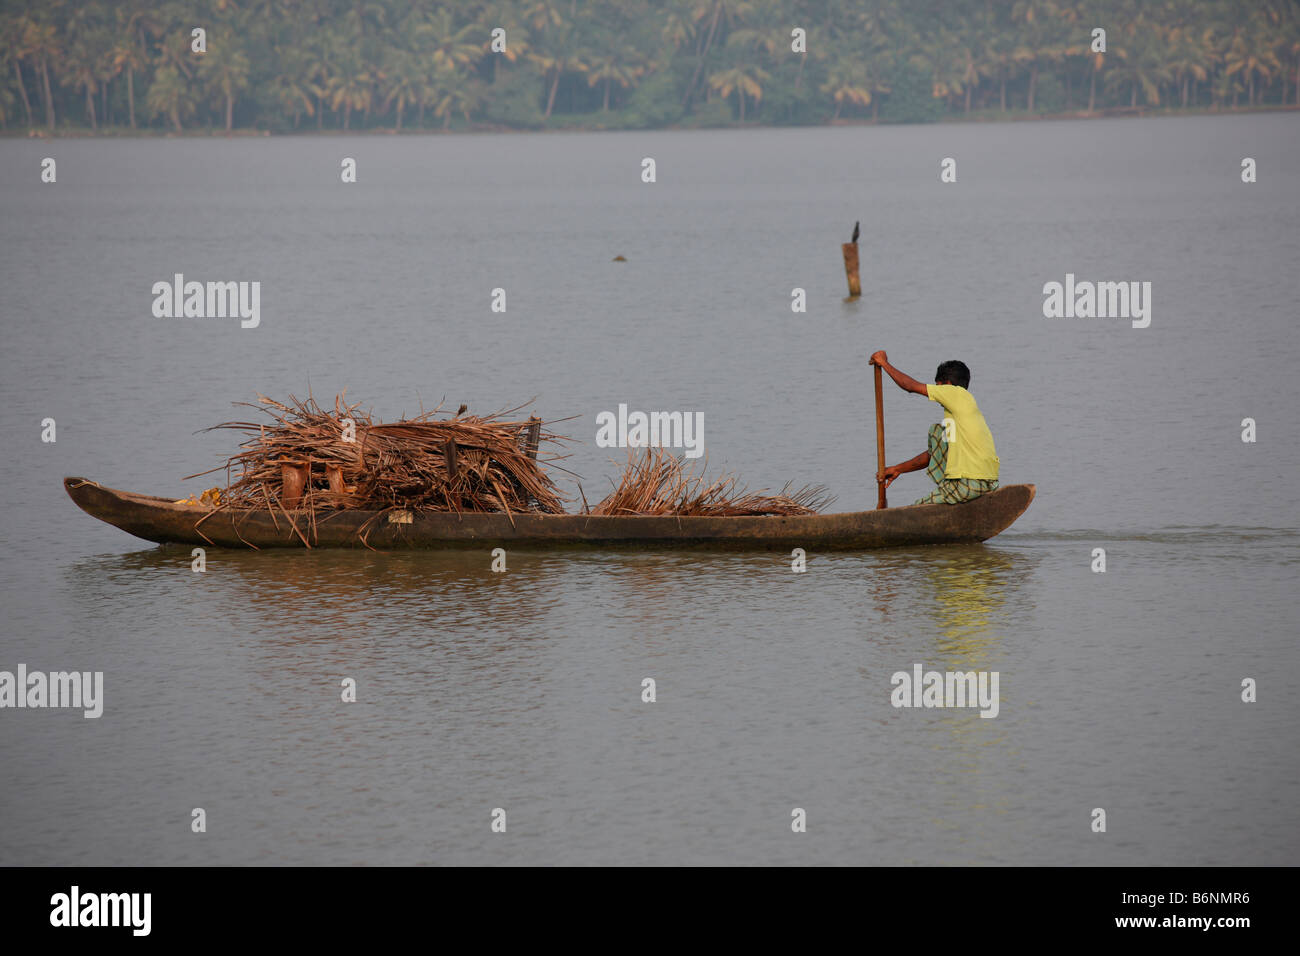 A boatman carrying goods on a boat Stock Photo